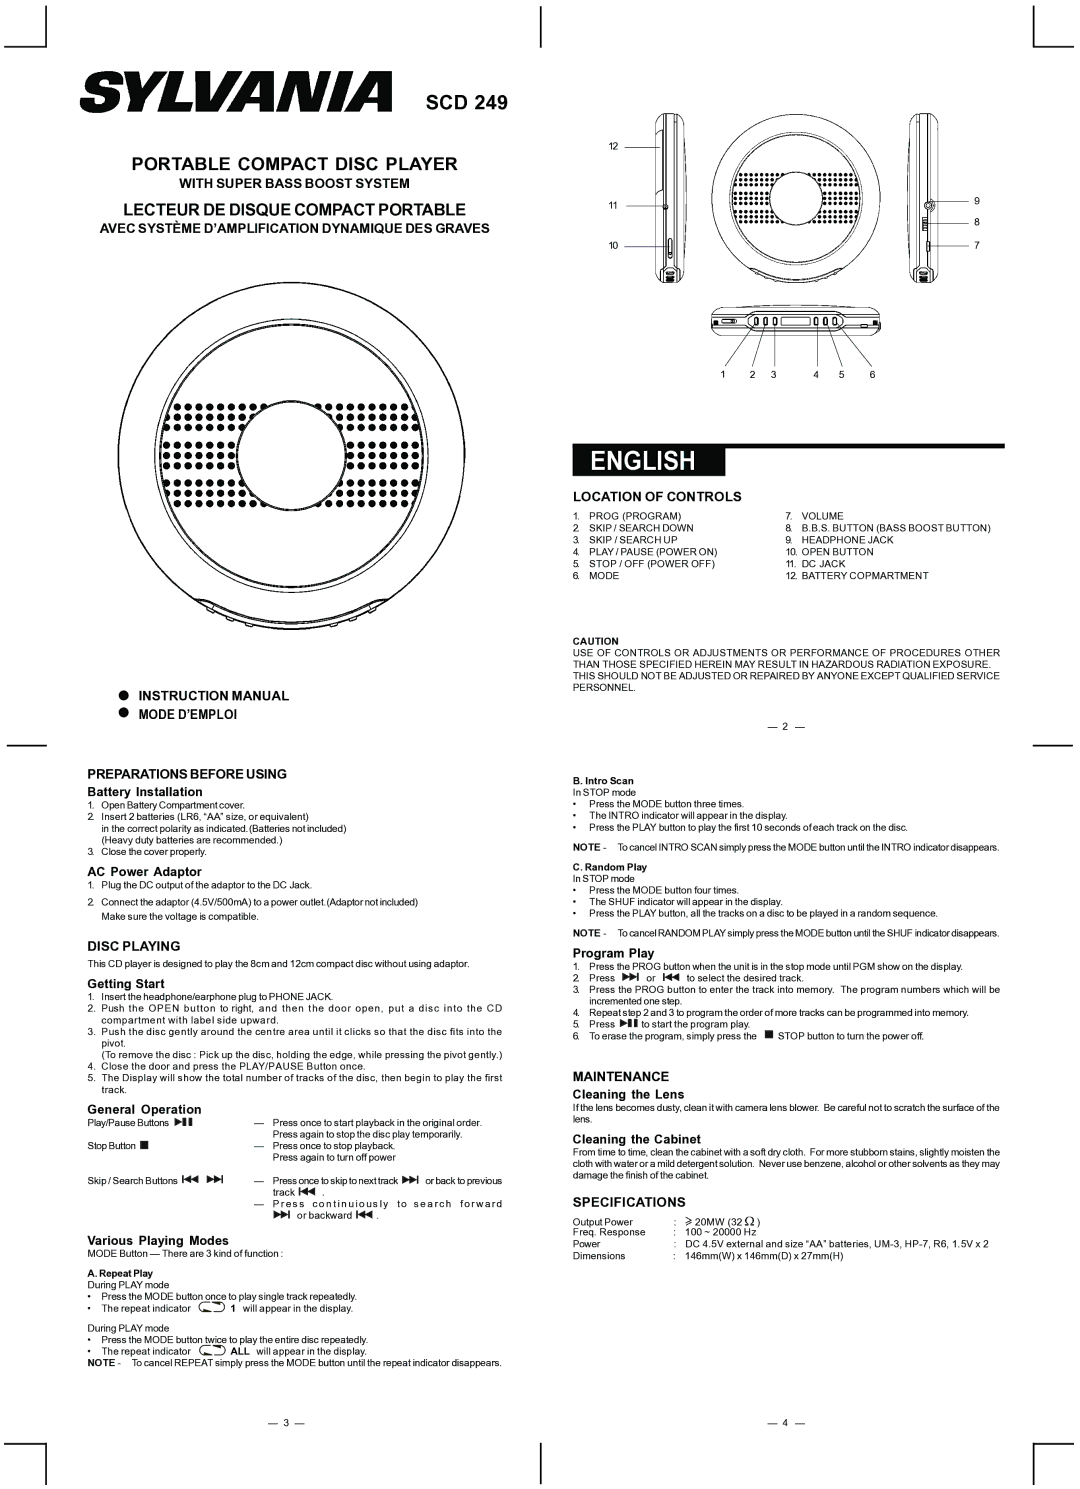 Sylvania SCD249 instruction manual With Super Bass Boost System, Mode D’EMPLOI Preparations Before Using, Disc Playing 